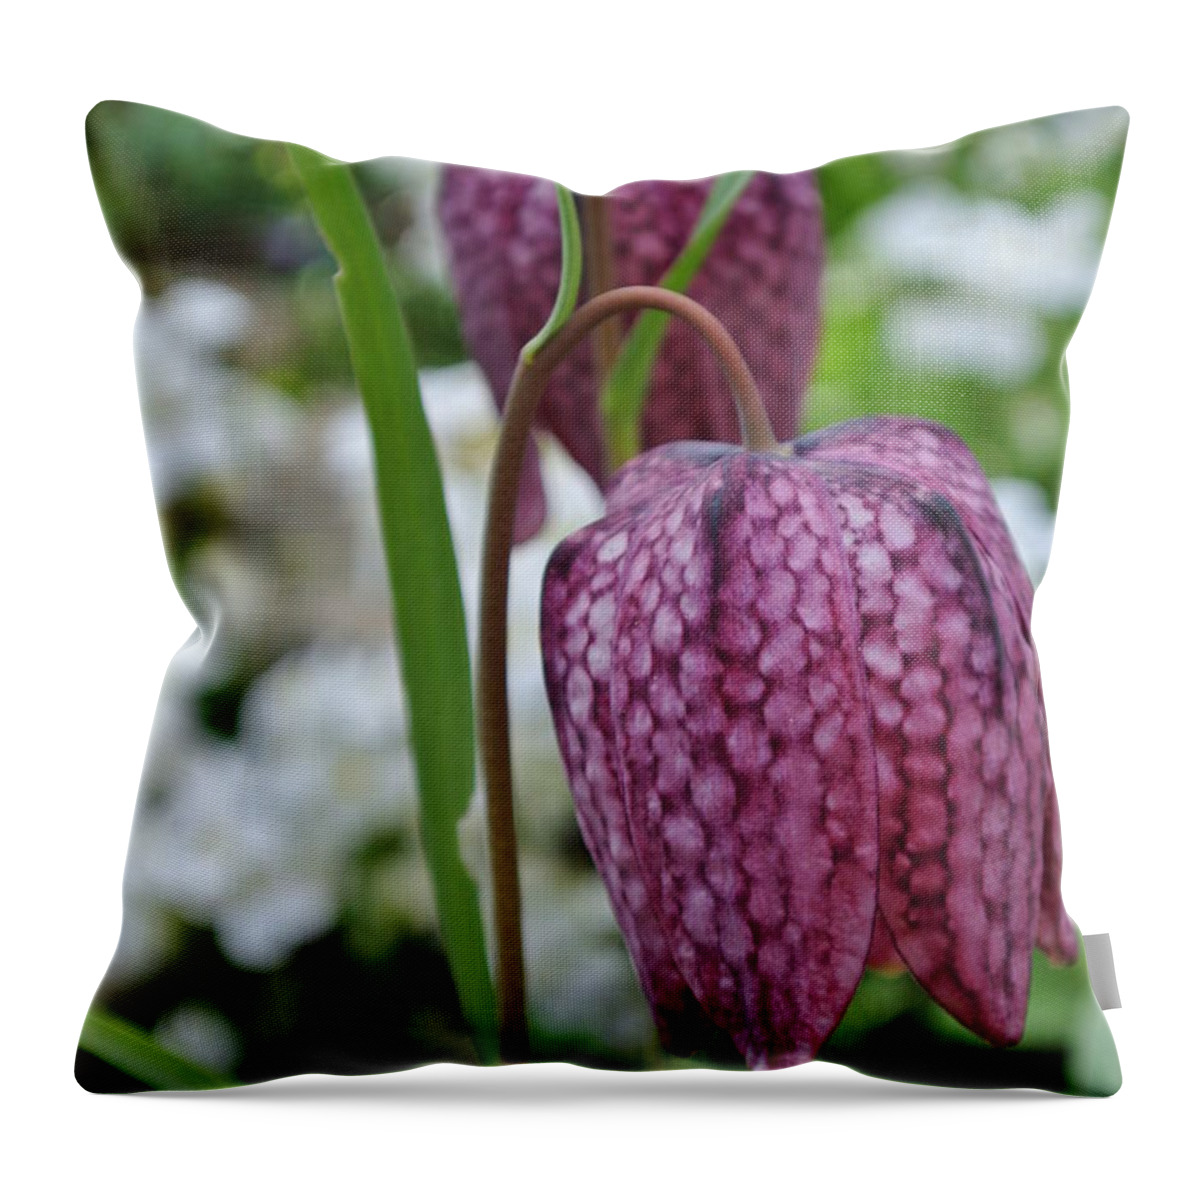  Throw Pillow featuring the photograph Chocolate Lily by Sharron Cuthbertson